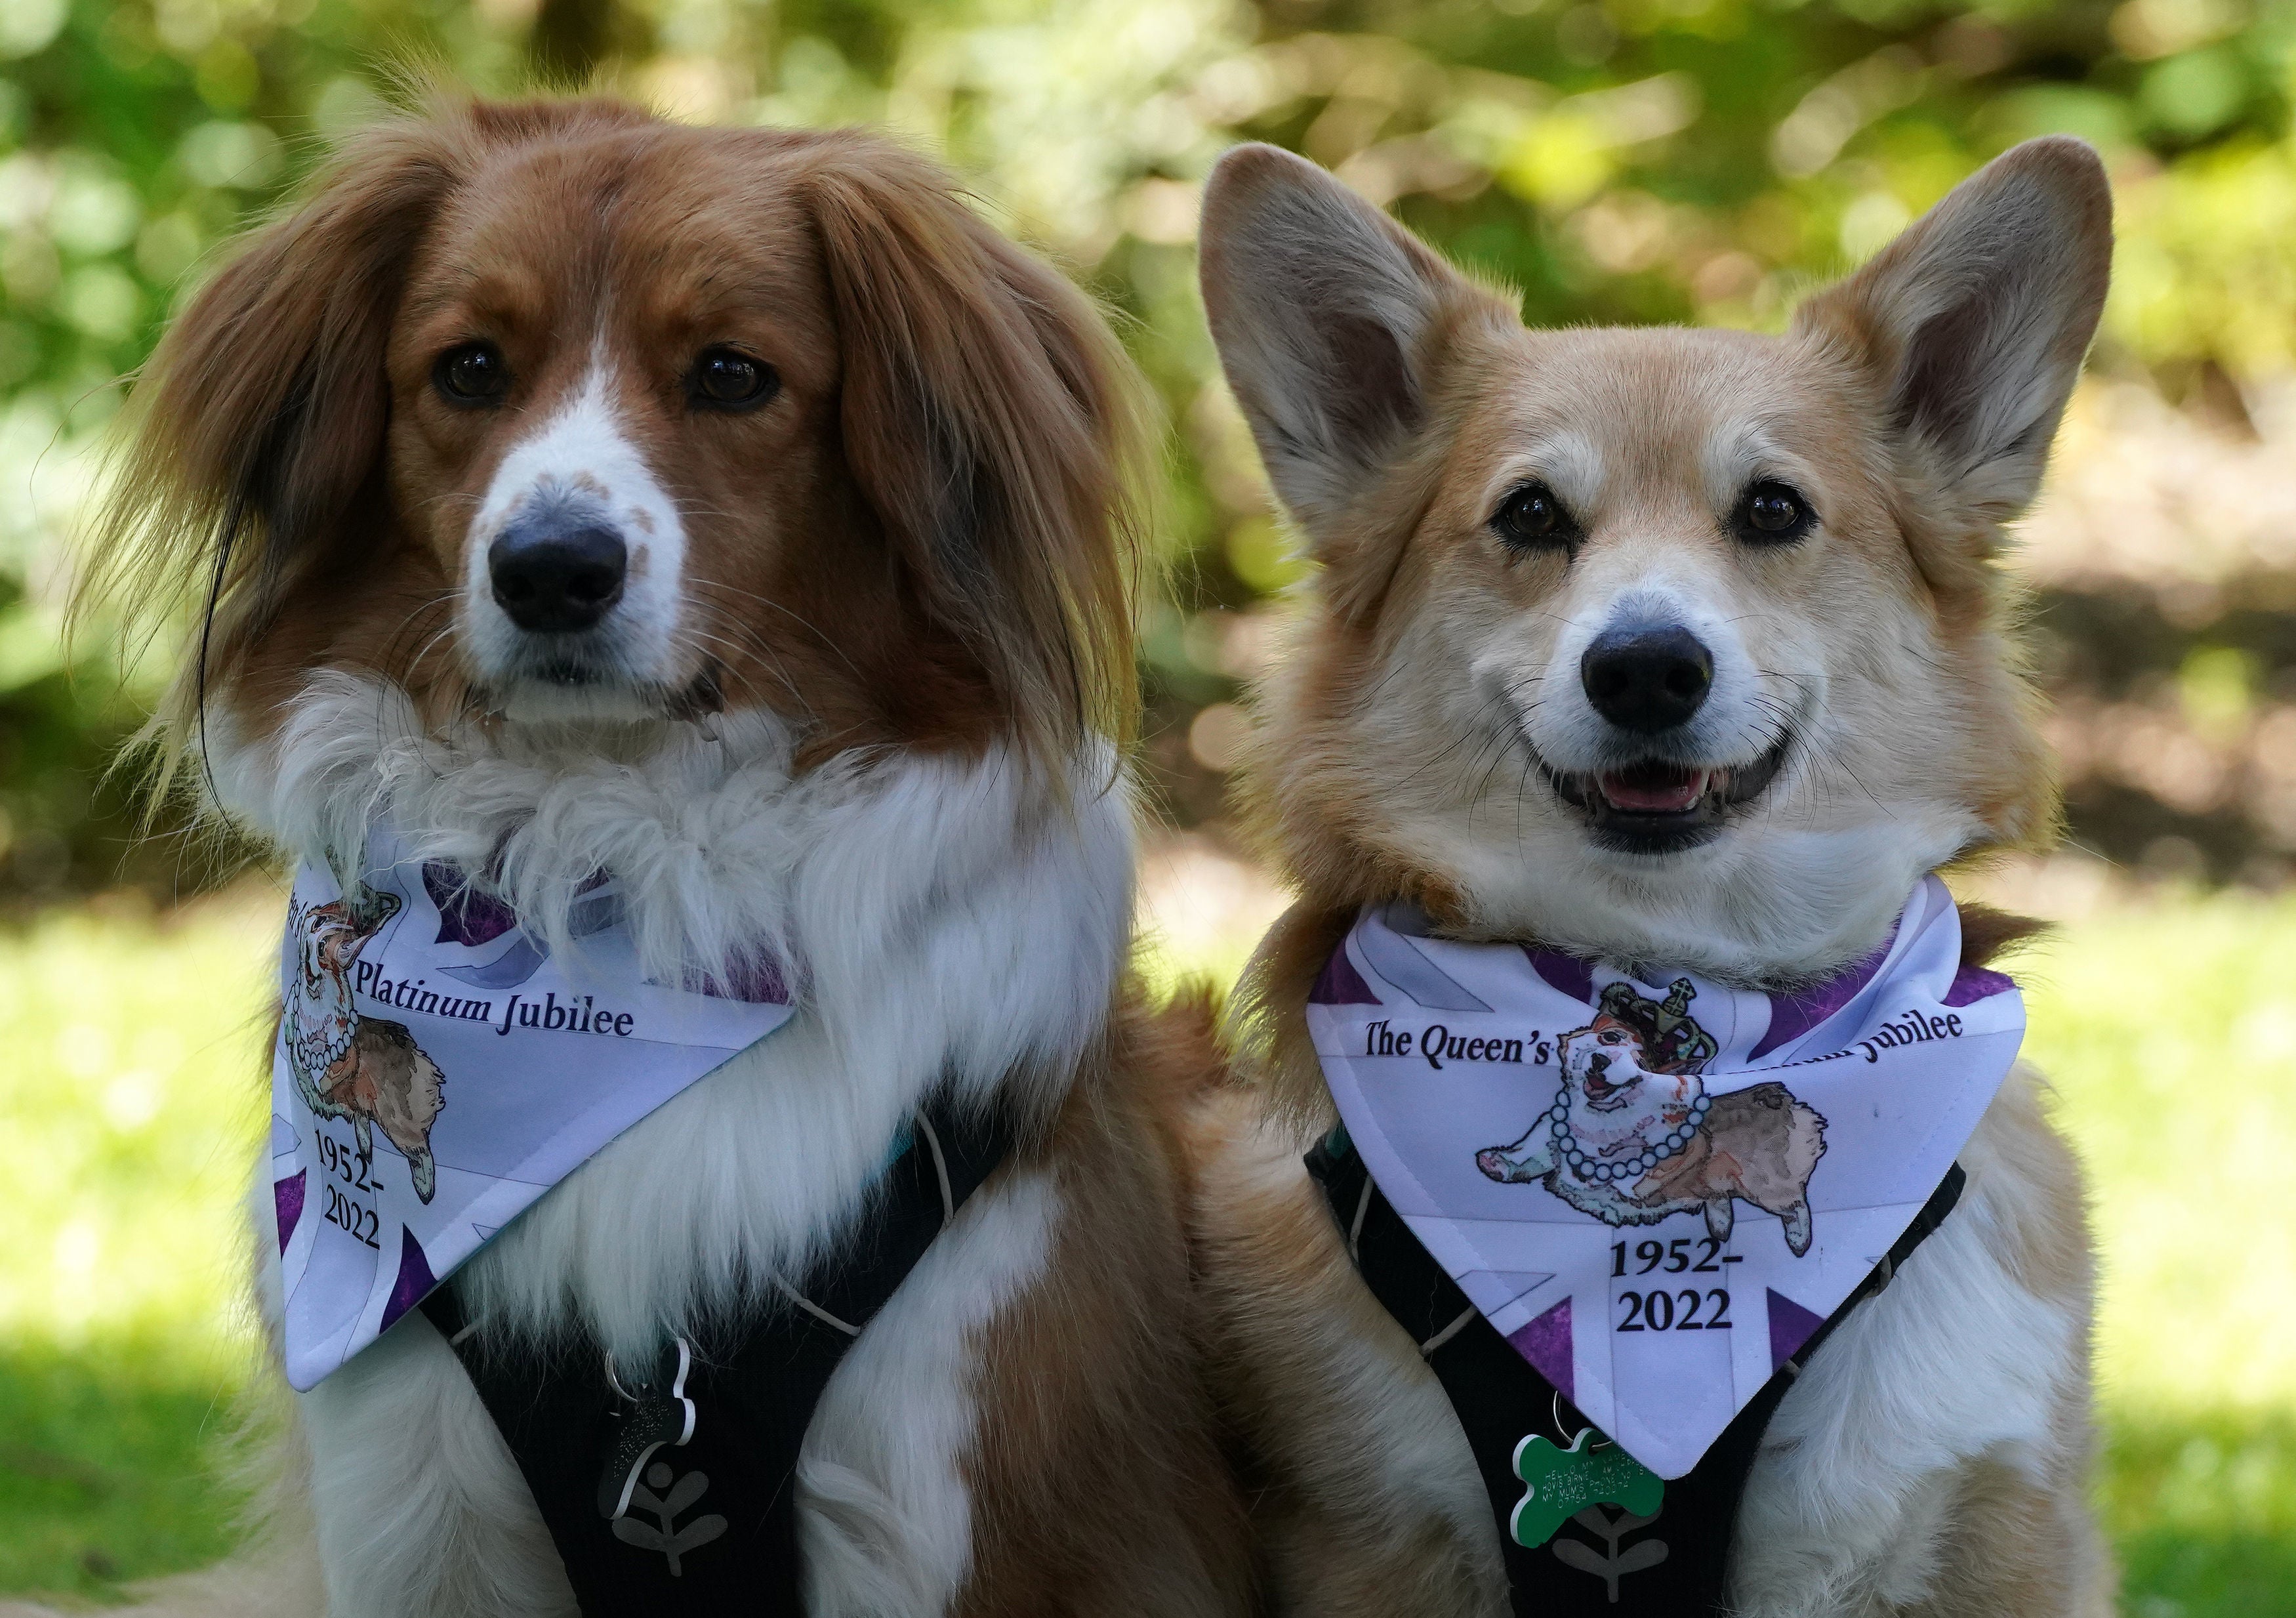 Corgis Bradley and Hovis at Balmoral during an event with the Corgi Society of Scotland to mark Queen Elizabeth II’s Platinum Jubilee